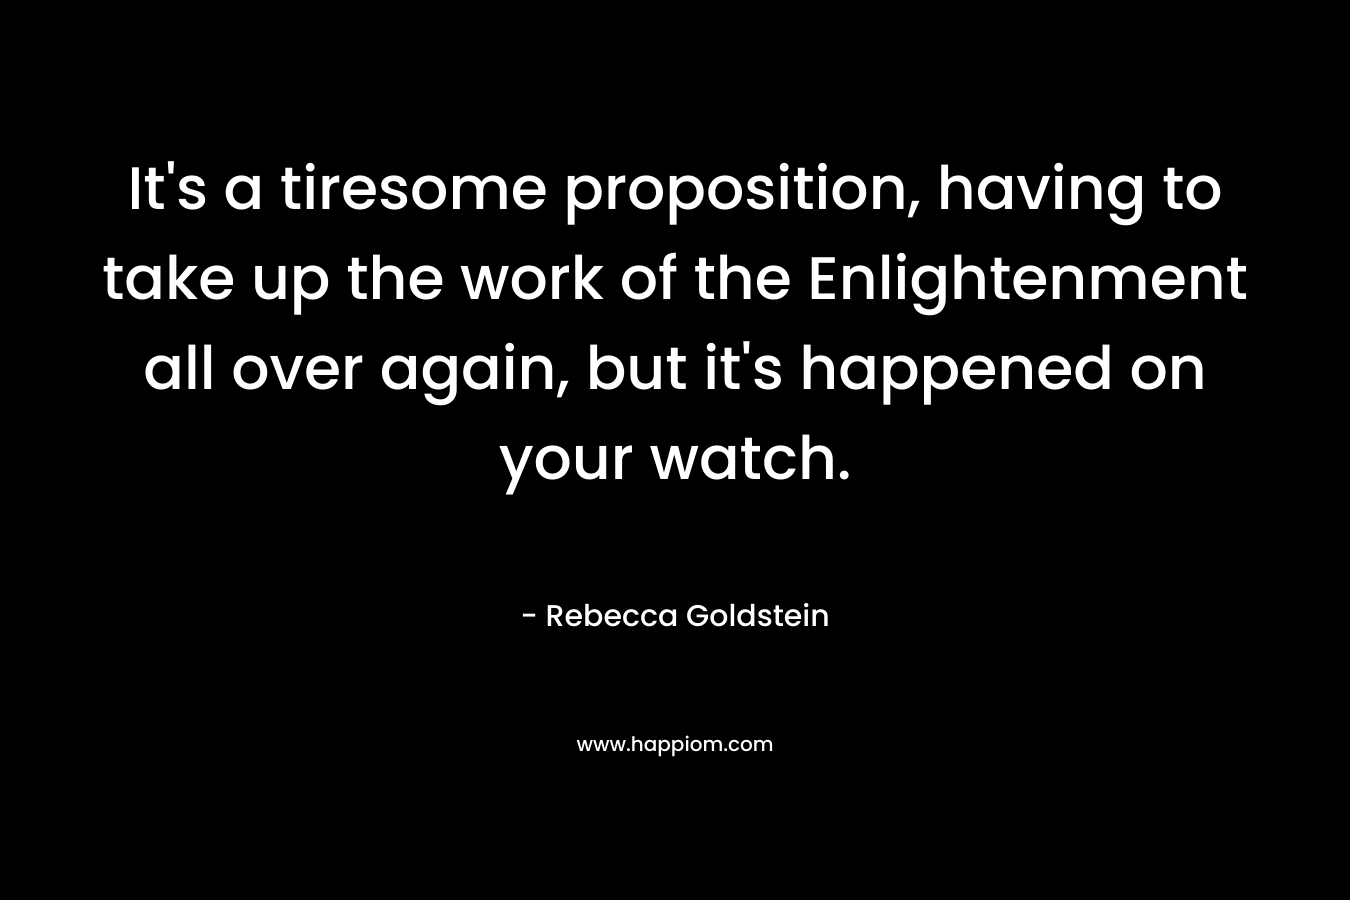 It’s a tiresome proposition, having to take up the work of the Enlightenment all over again, but it’s happened on your watch. – Rebecca Goldstein